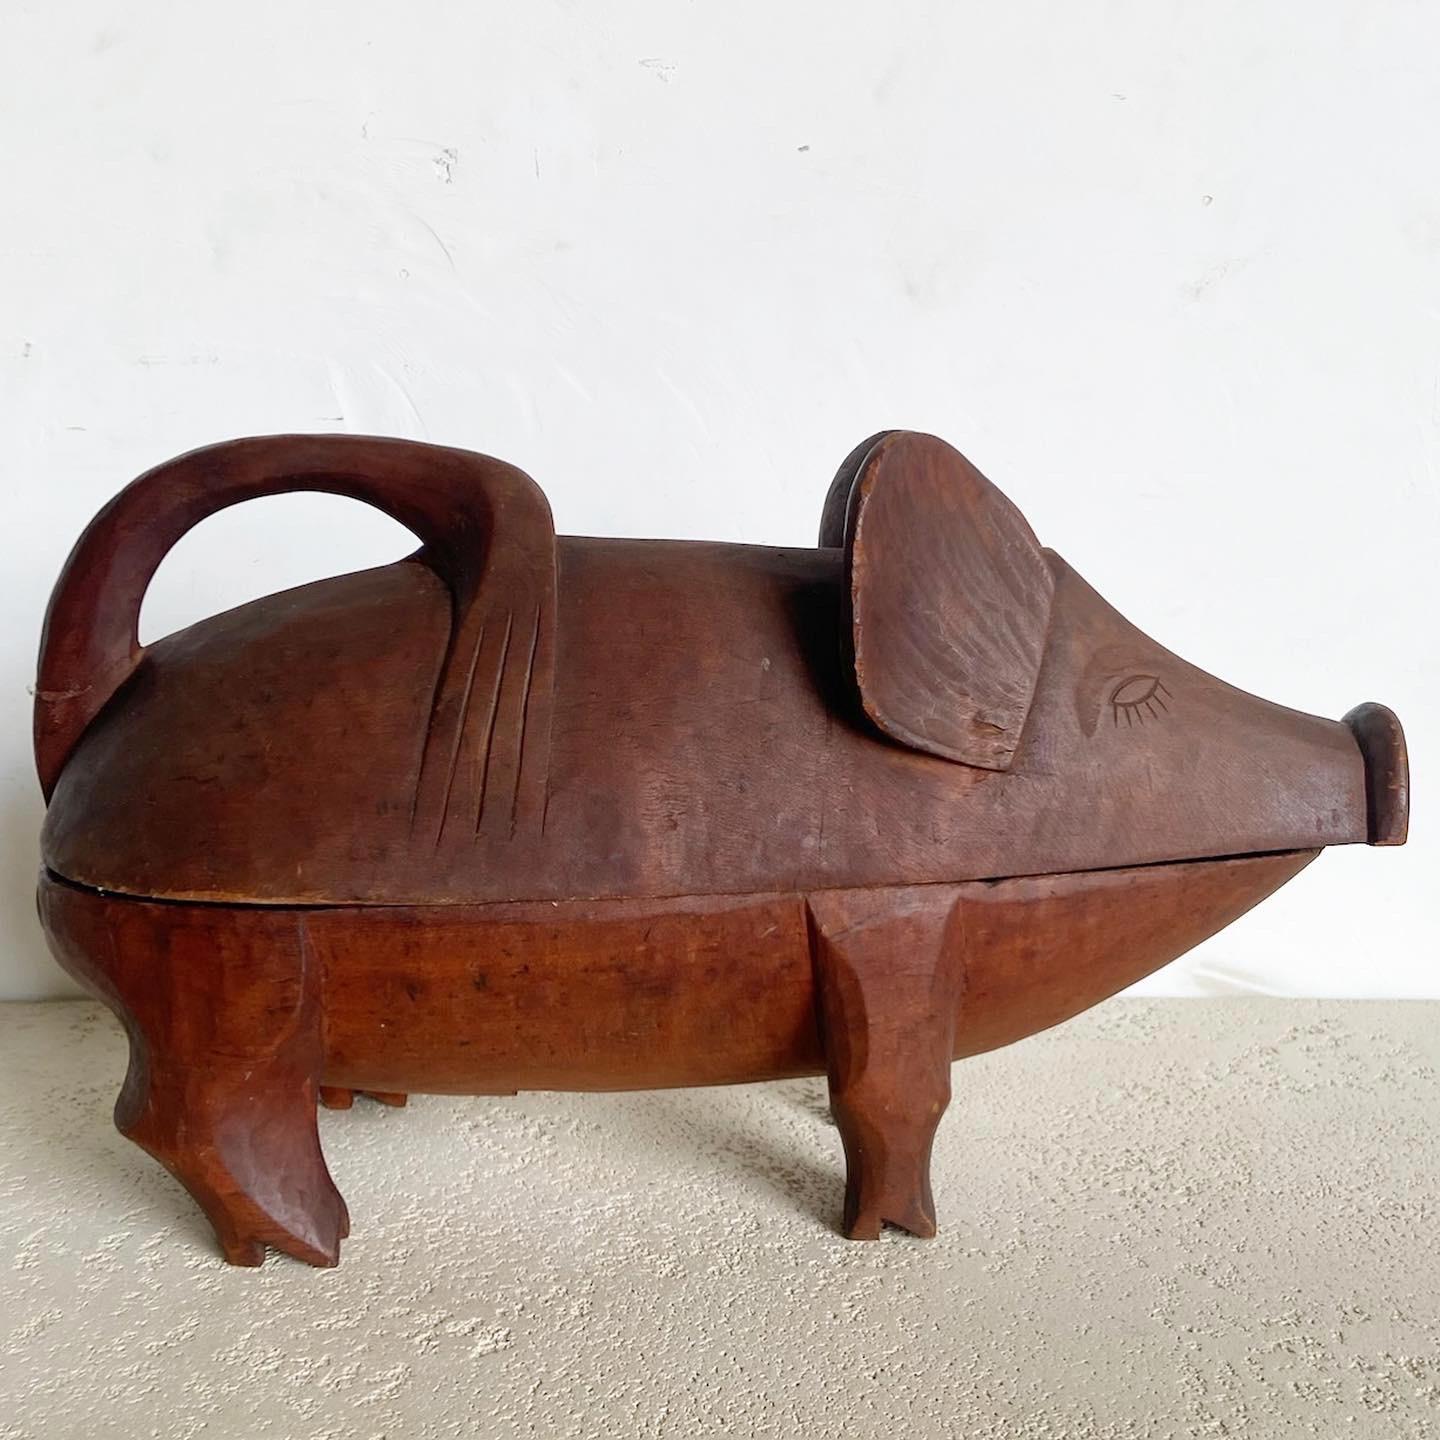 Vintage Hand Carved Wooden Pig Container/Tray 4